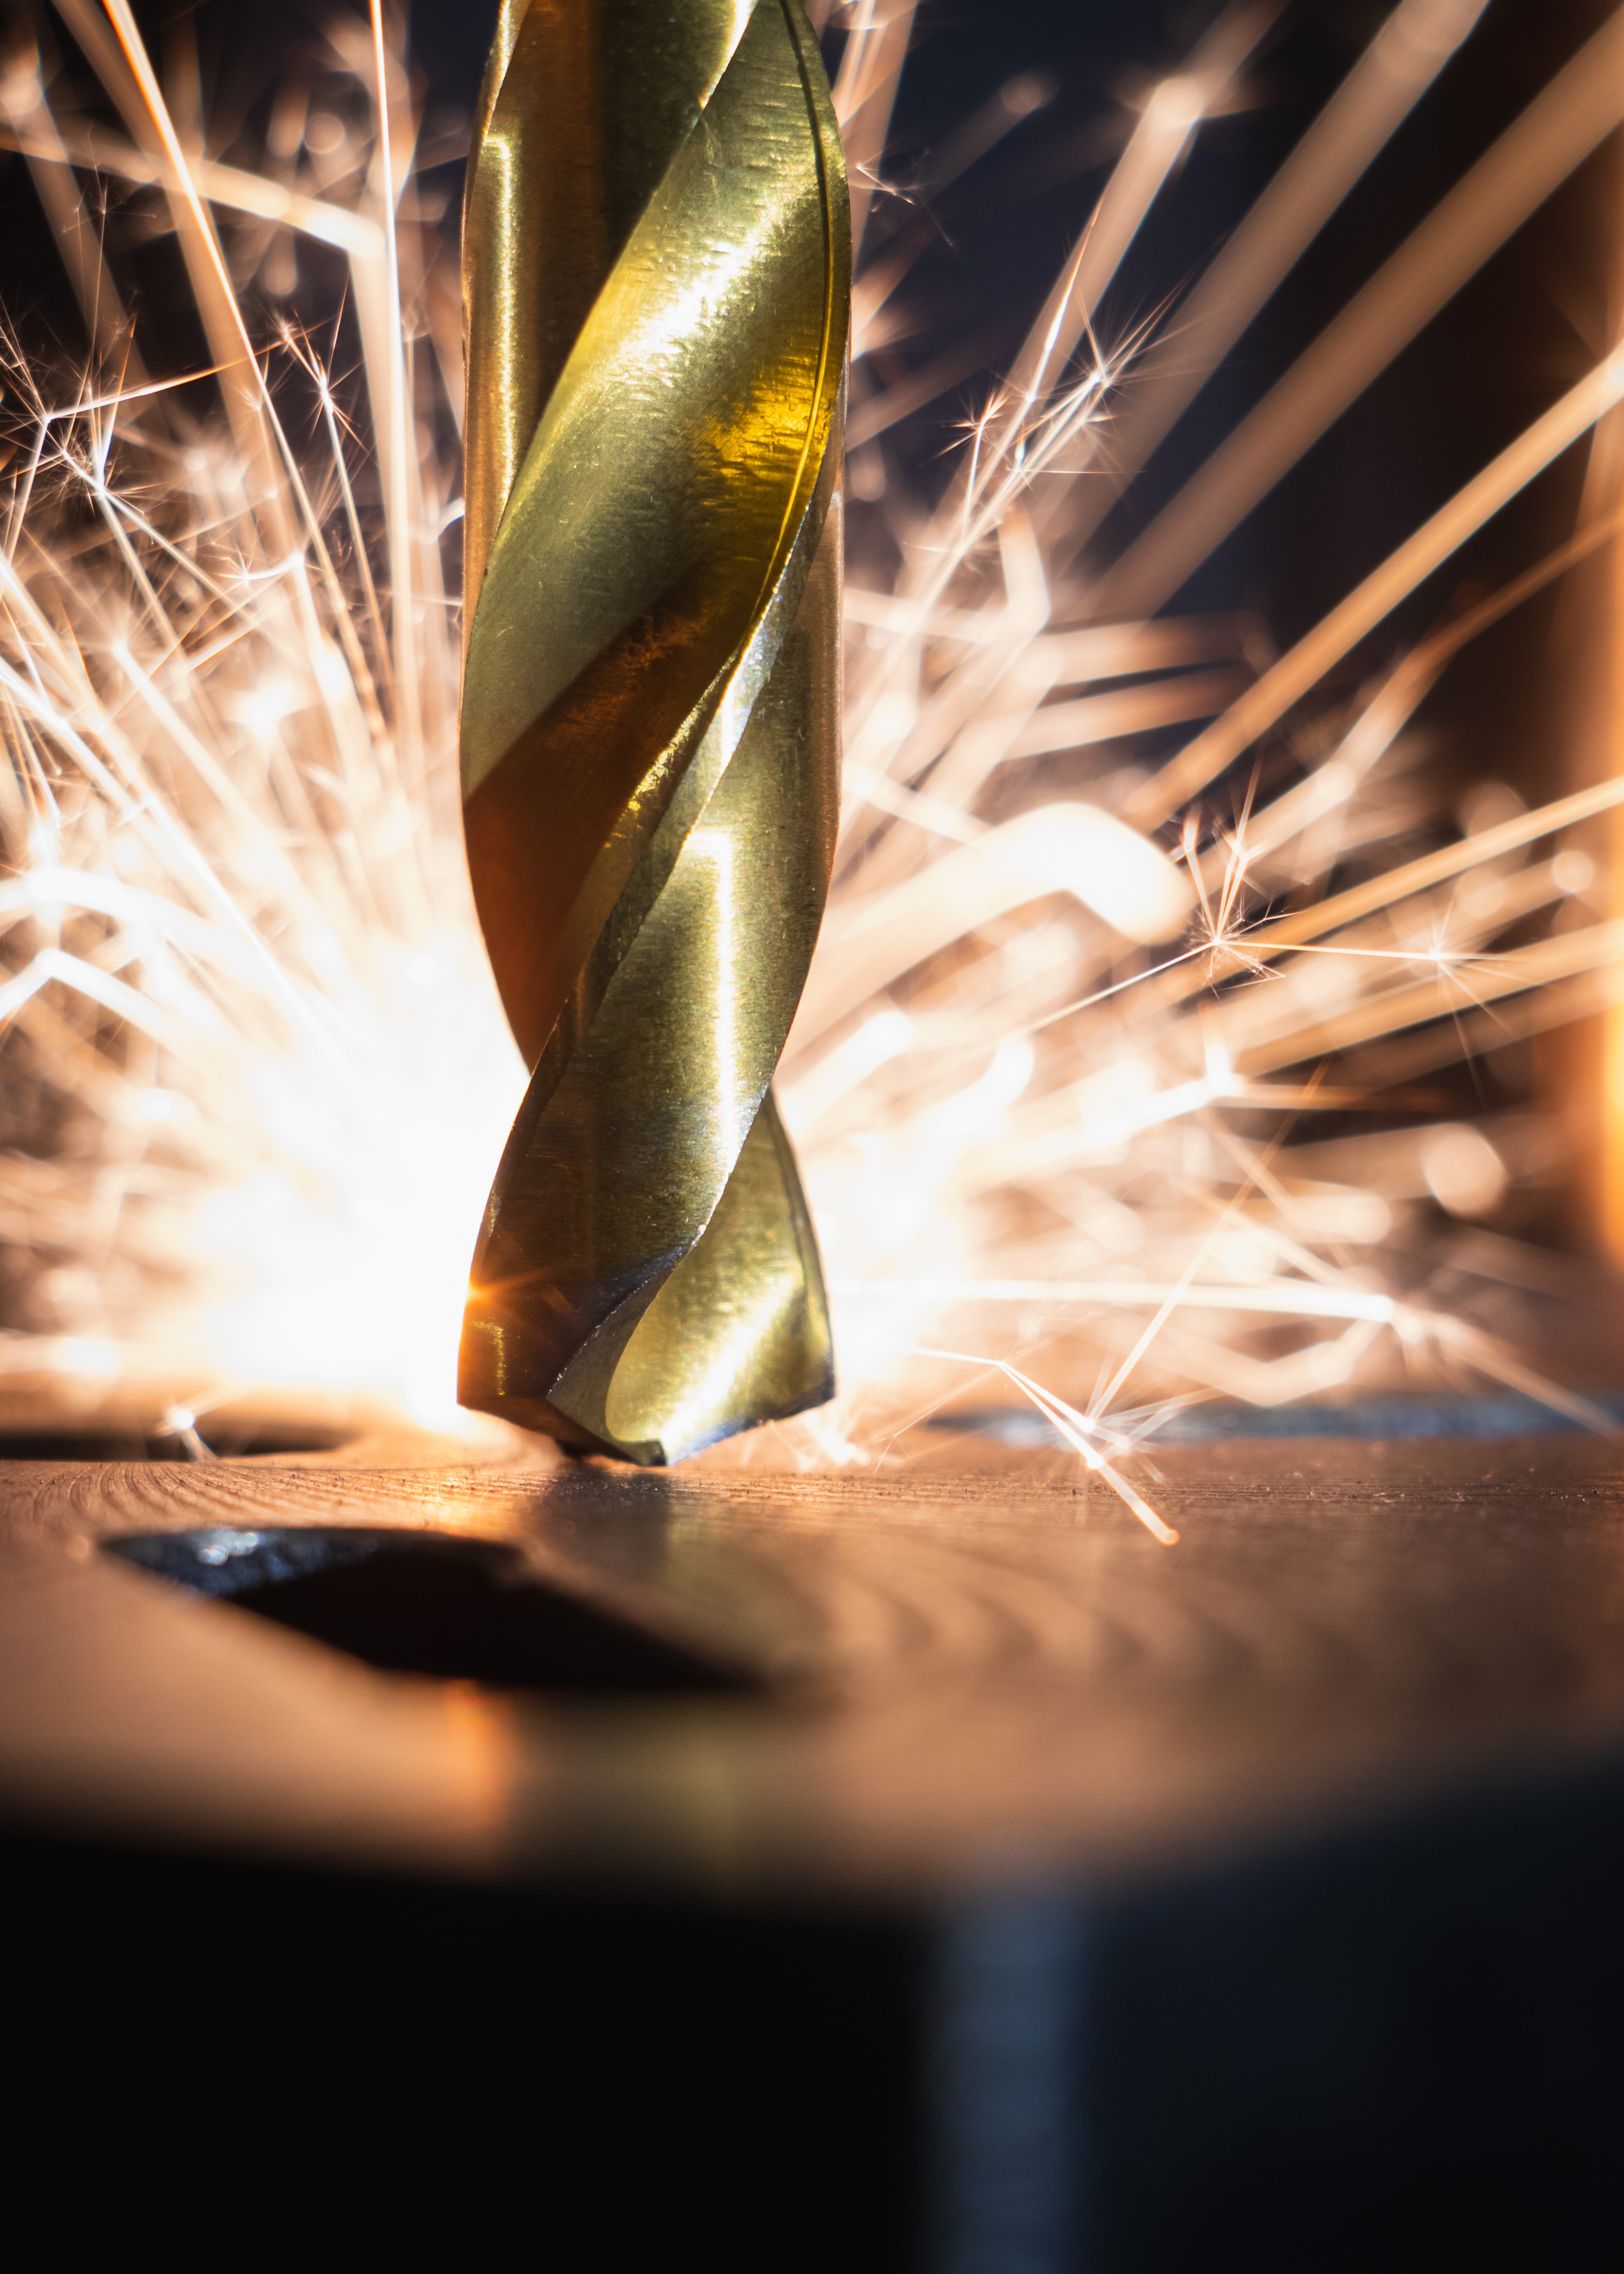 metal fabrication services